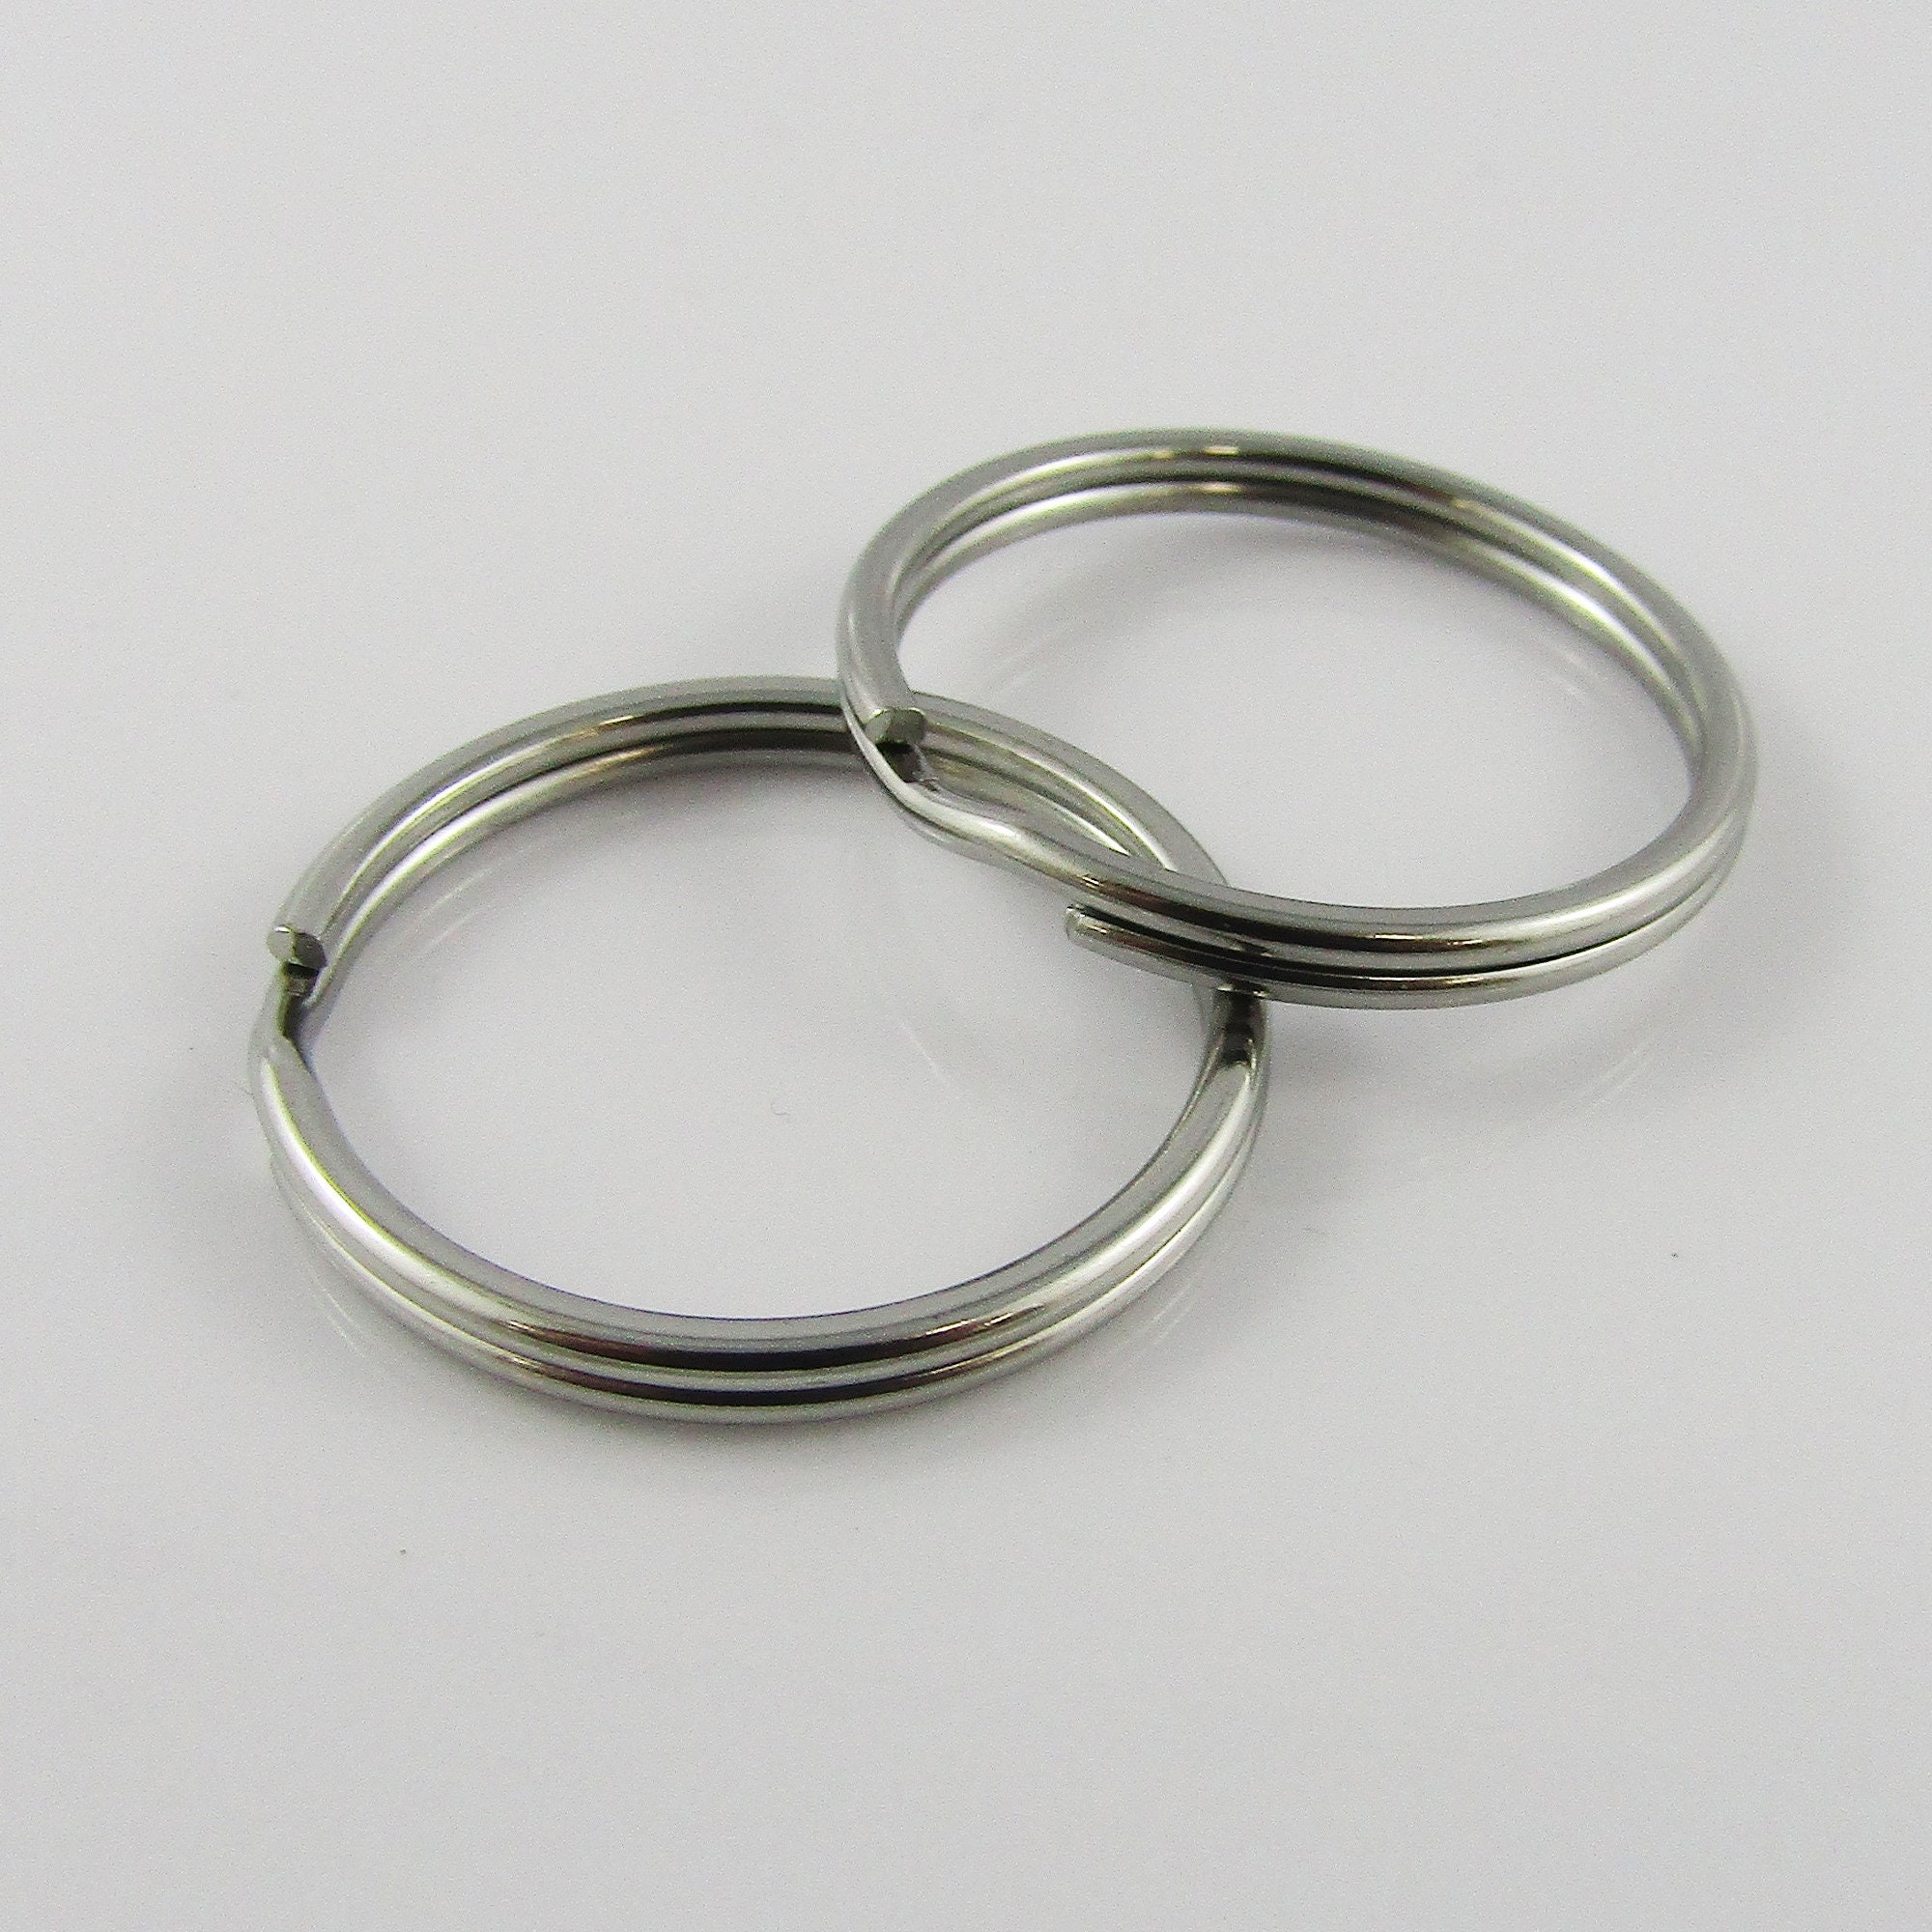 Sterling Silver Jump Ring Open 18 GA, 6 Sizes, Wholesale Bulk Pricing,  SS-JR18 